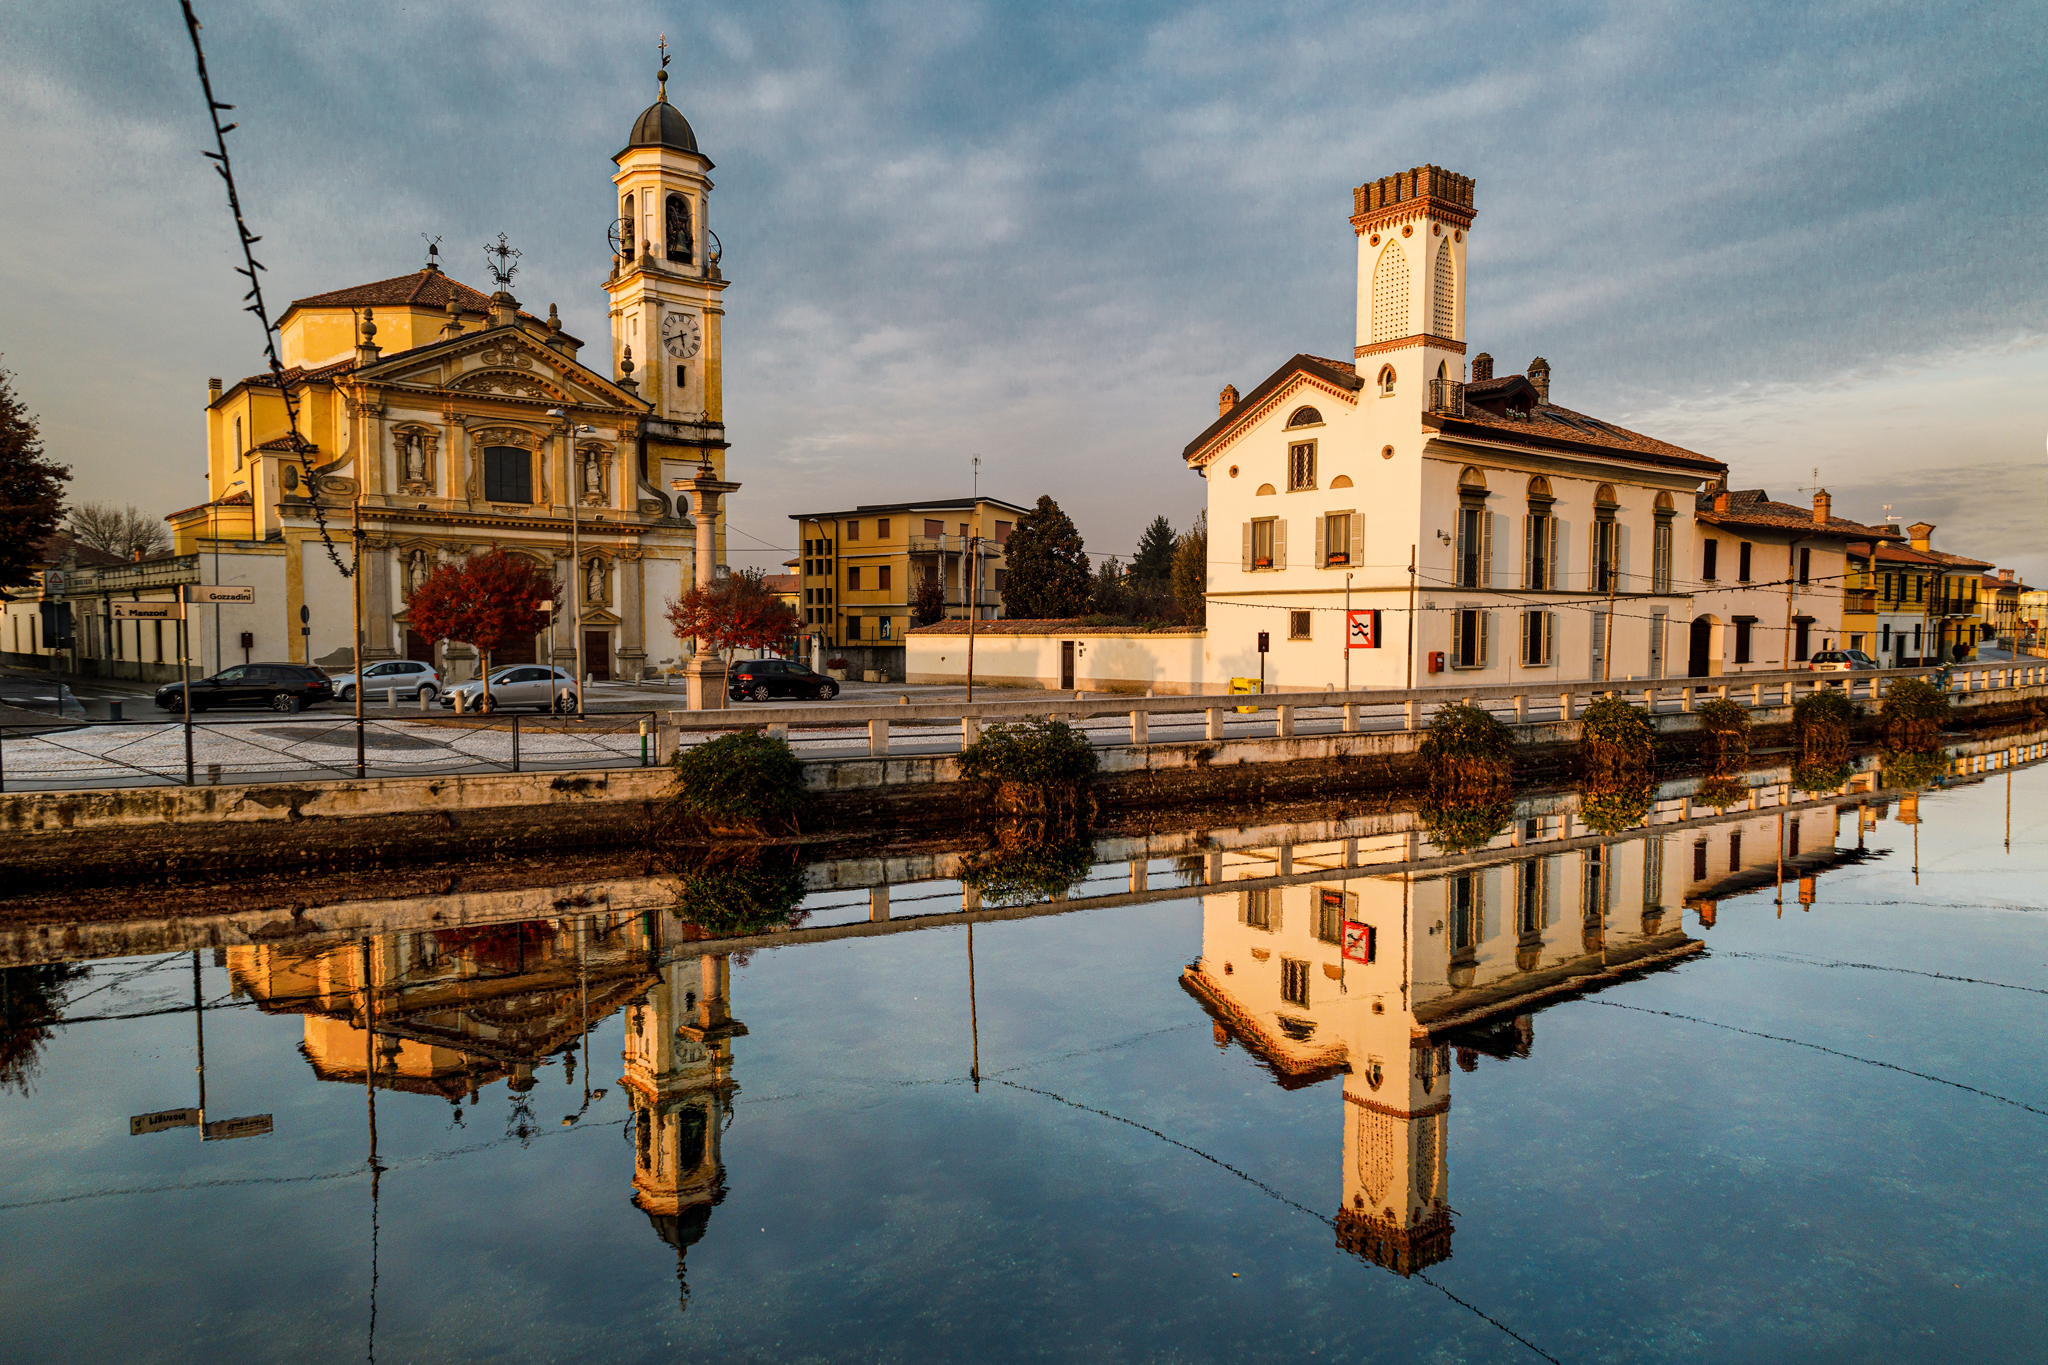 Gaggiano reflected...